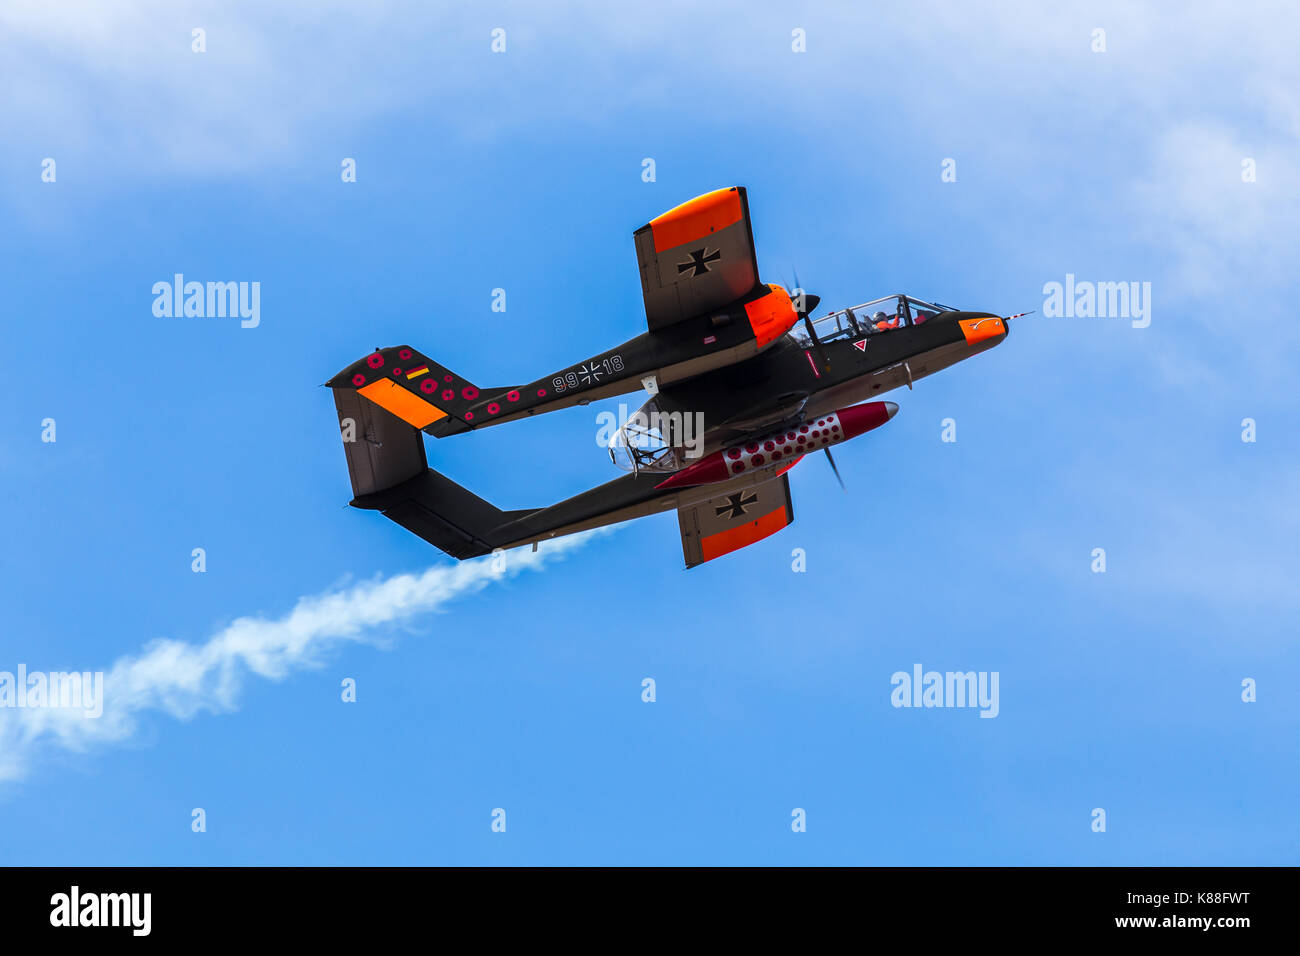 North American Aviation Rockwell OV-10 Bronco in Luftwaffe markings at the 2017 Southport airshow against a blue sky. Stock Photo